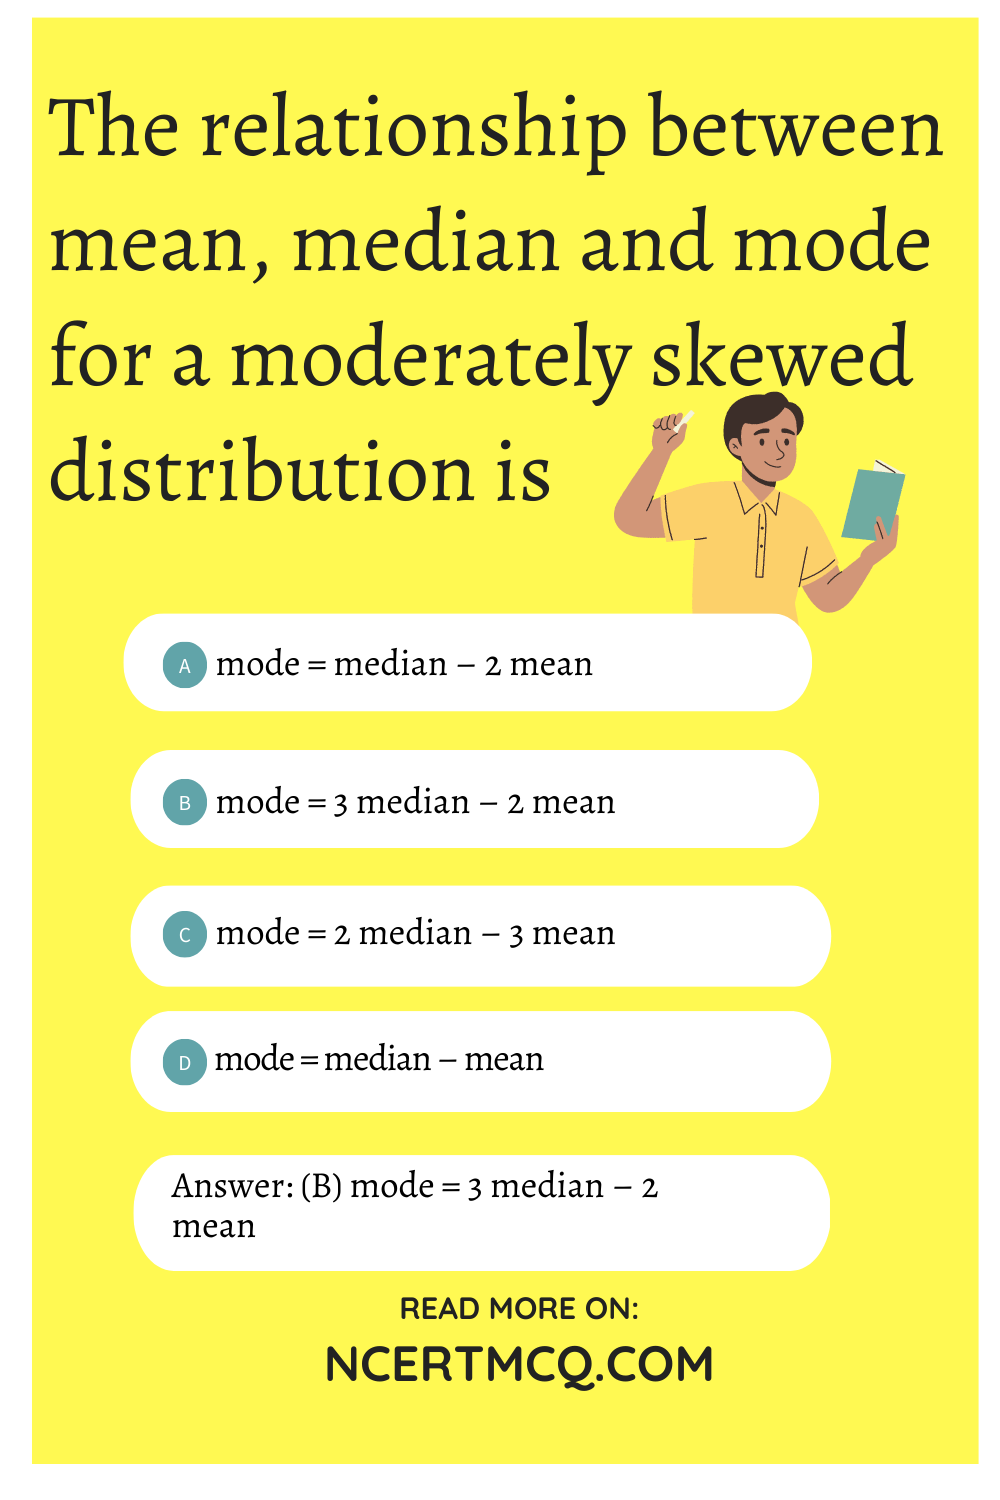 The relationship between mean, median and mode for a moderately skewed distribution is